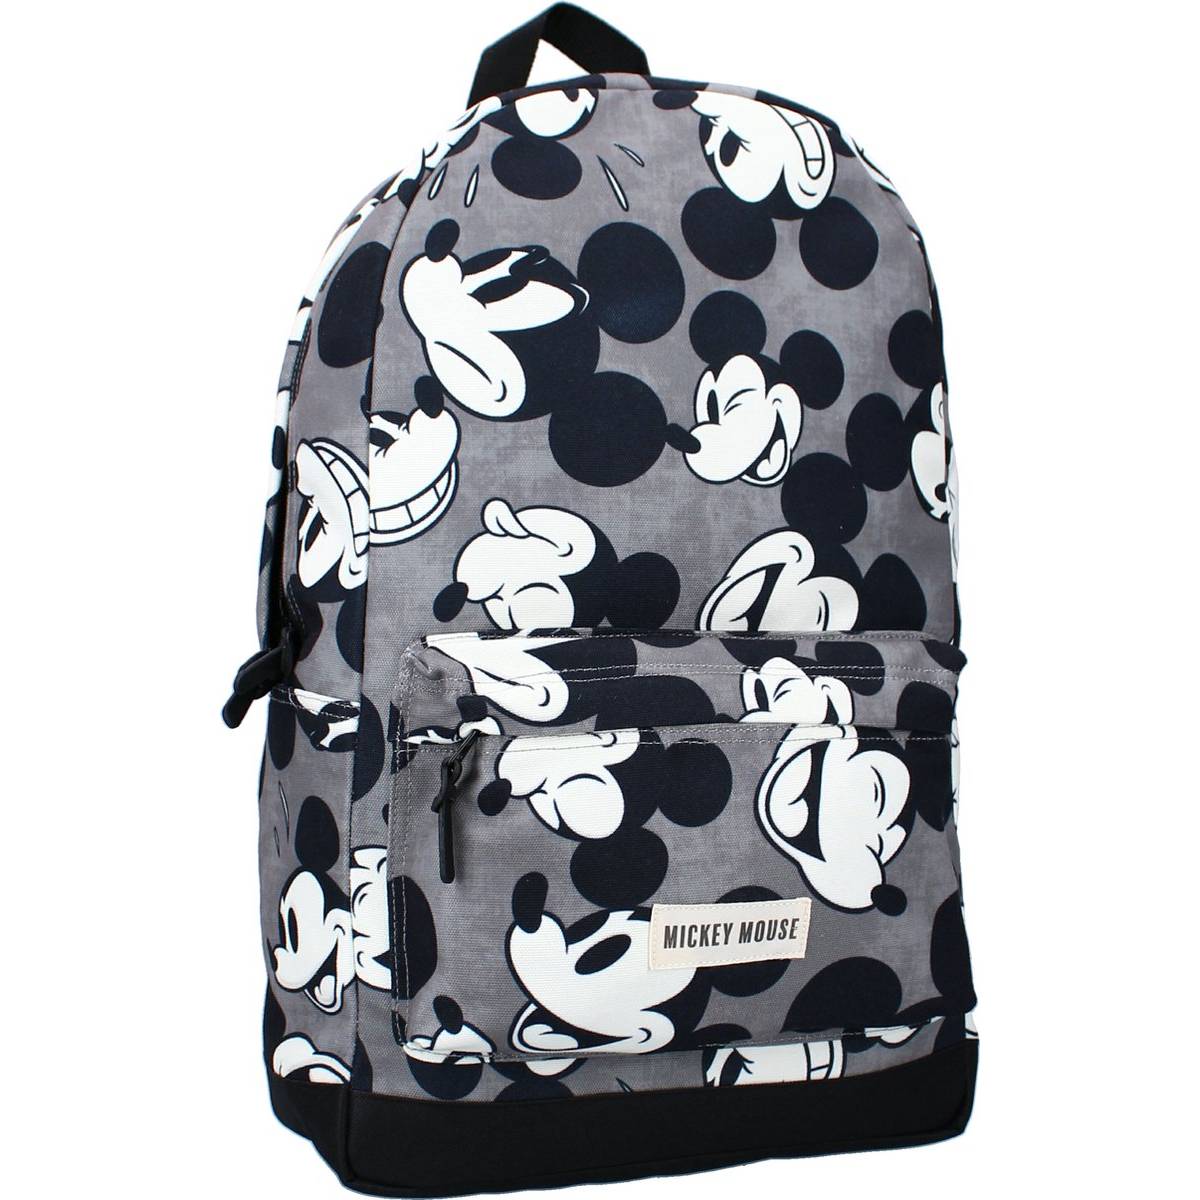 Sac à dos Mickey Mouse So Real Noir et Rouge